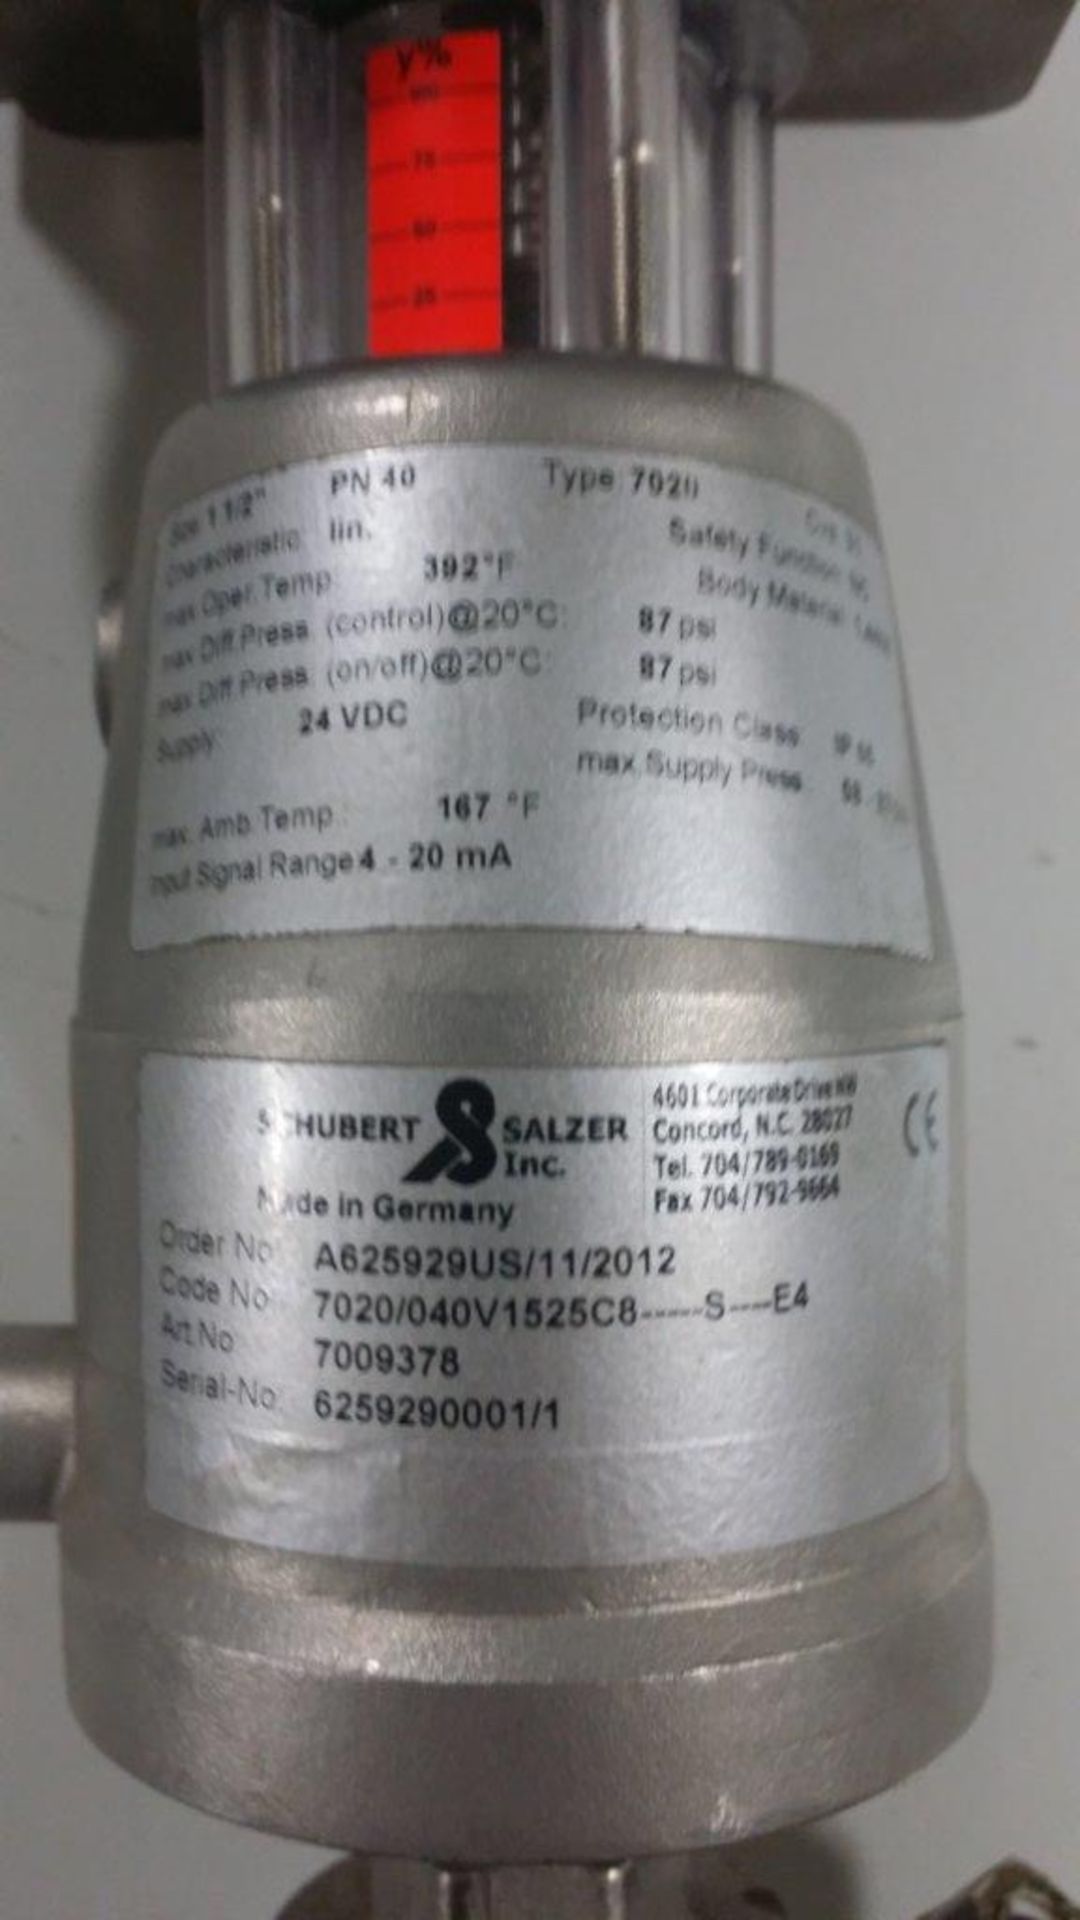 Schubert & Salzer Type 7020 Angle Seat Control Valve Size 1/4" to 3" Pressures up to 580 PSI, - Image 5 of 5